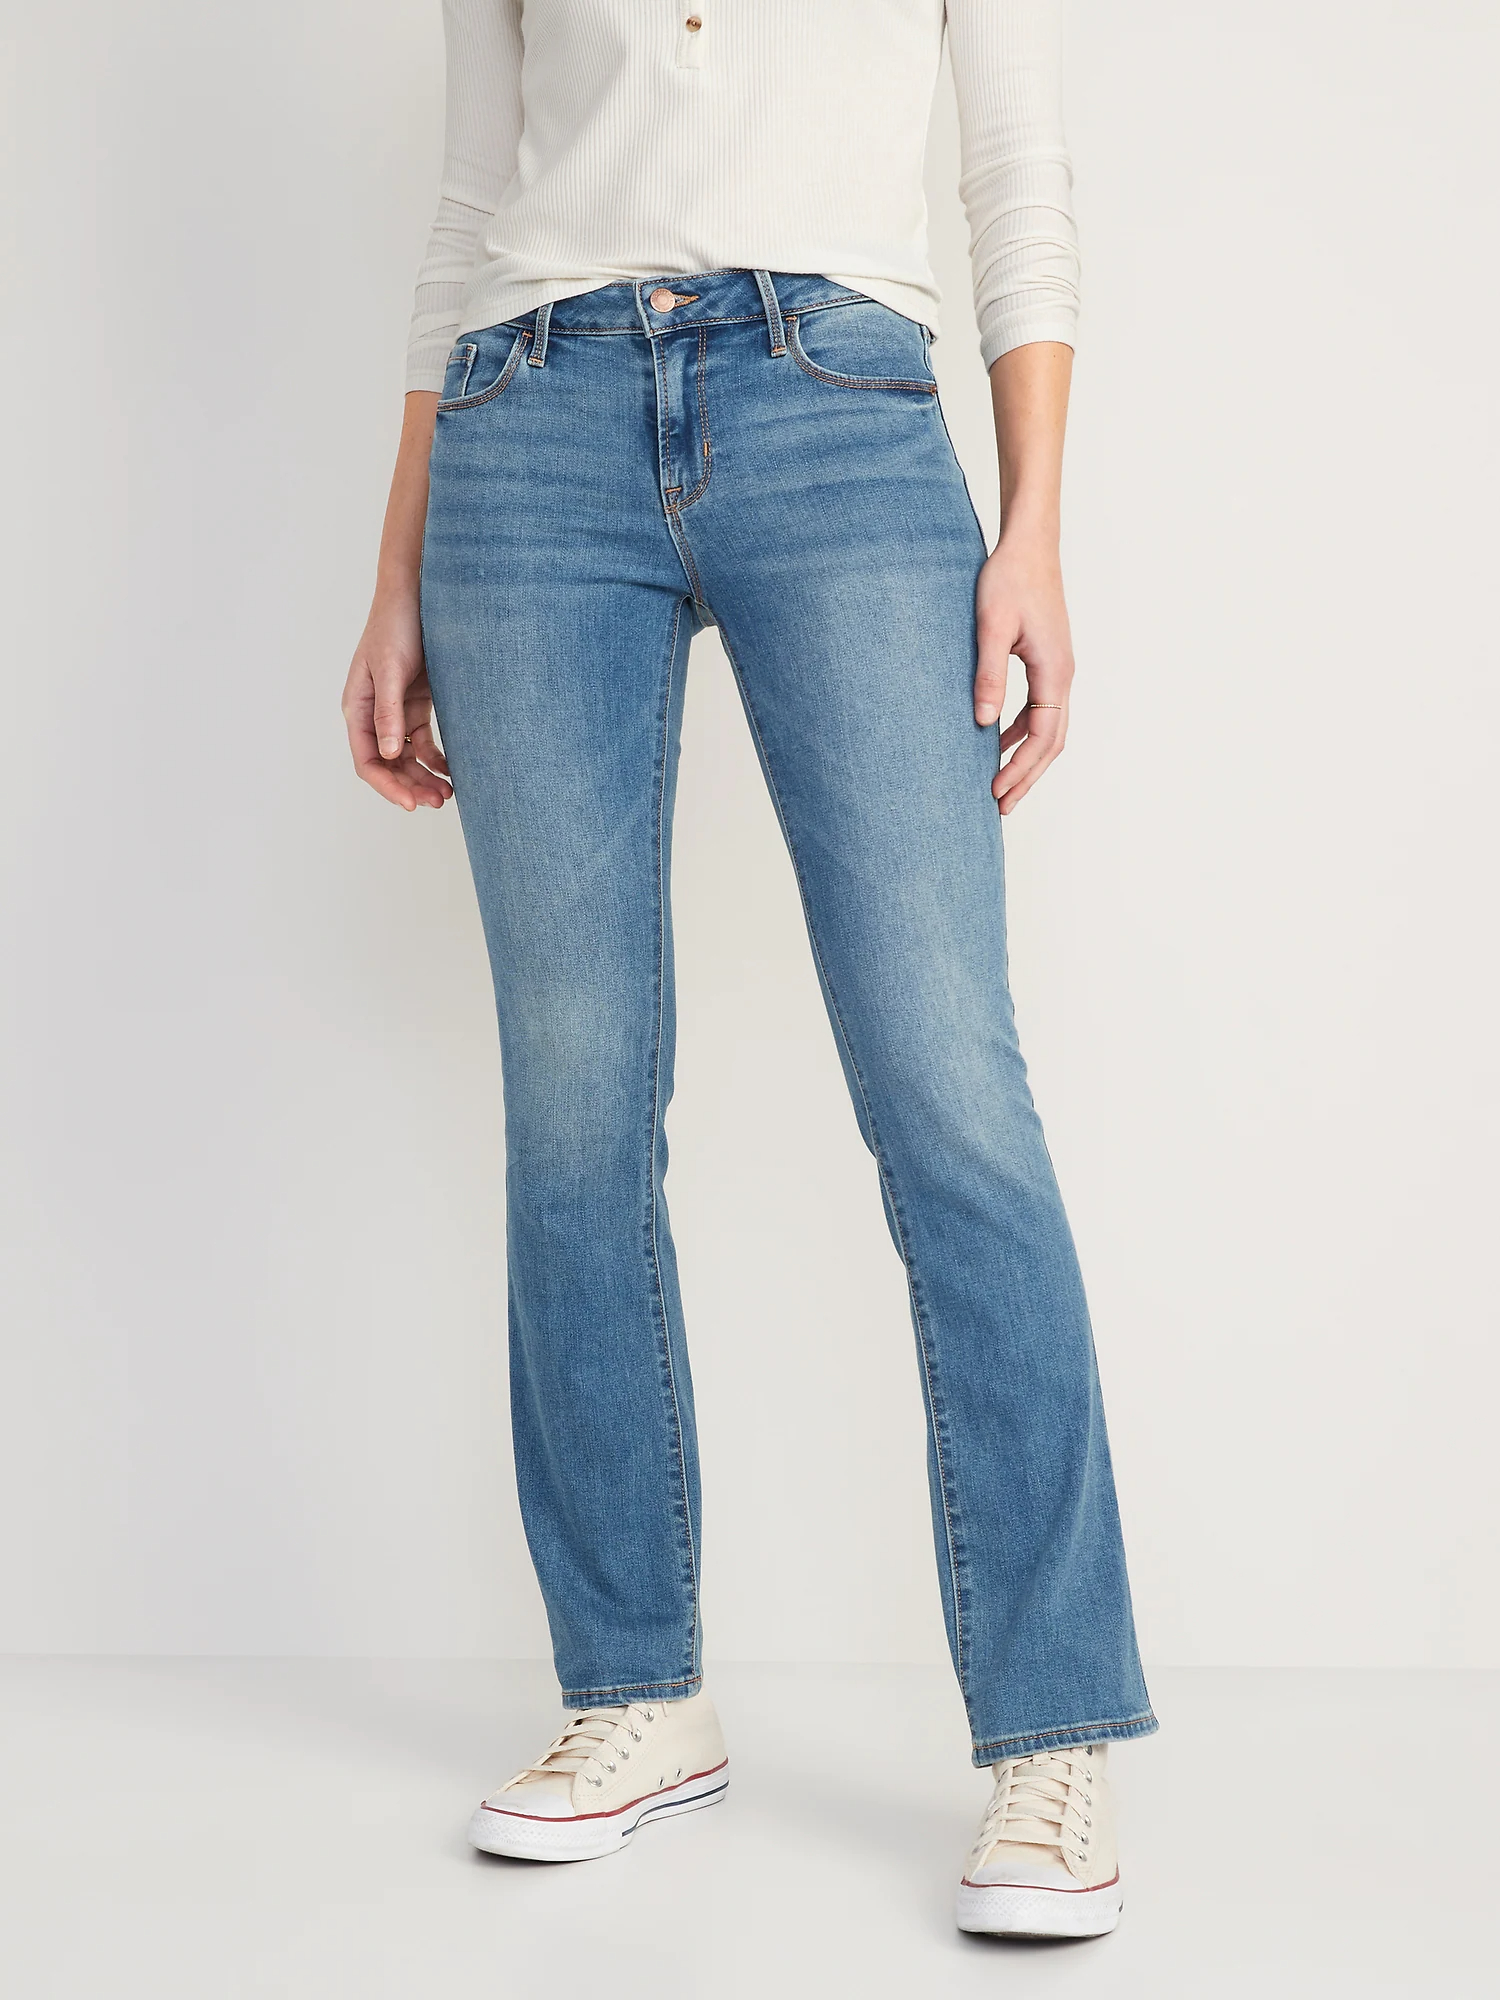 Old navy boot cut jeans : For Timeless Appeal”插图4